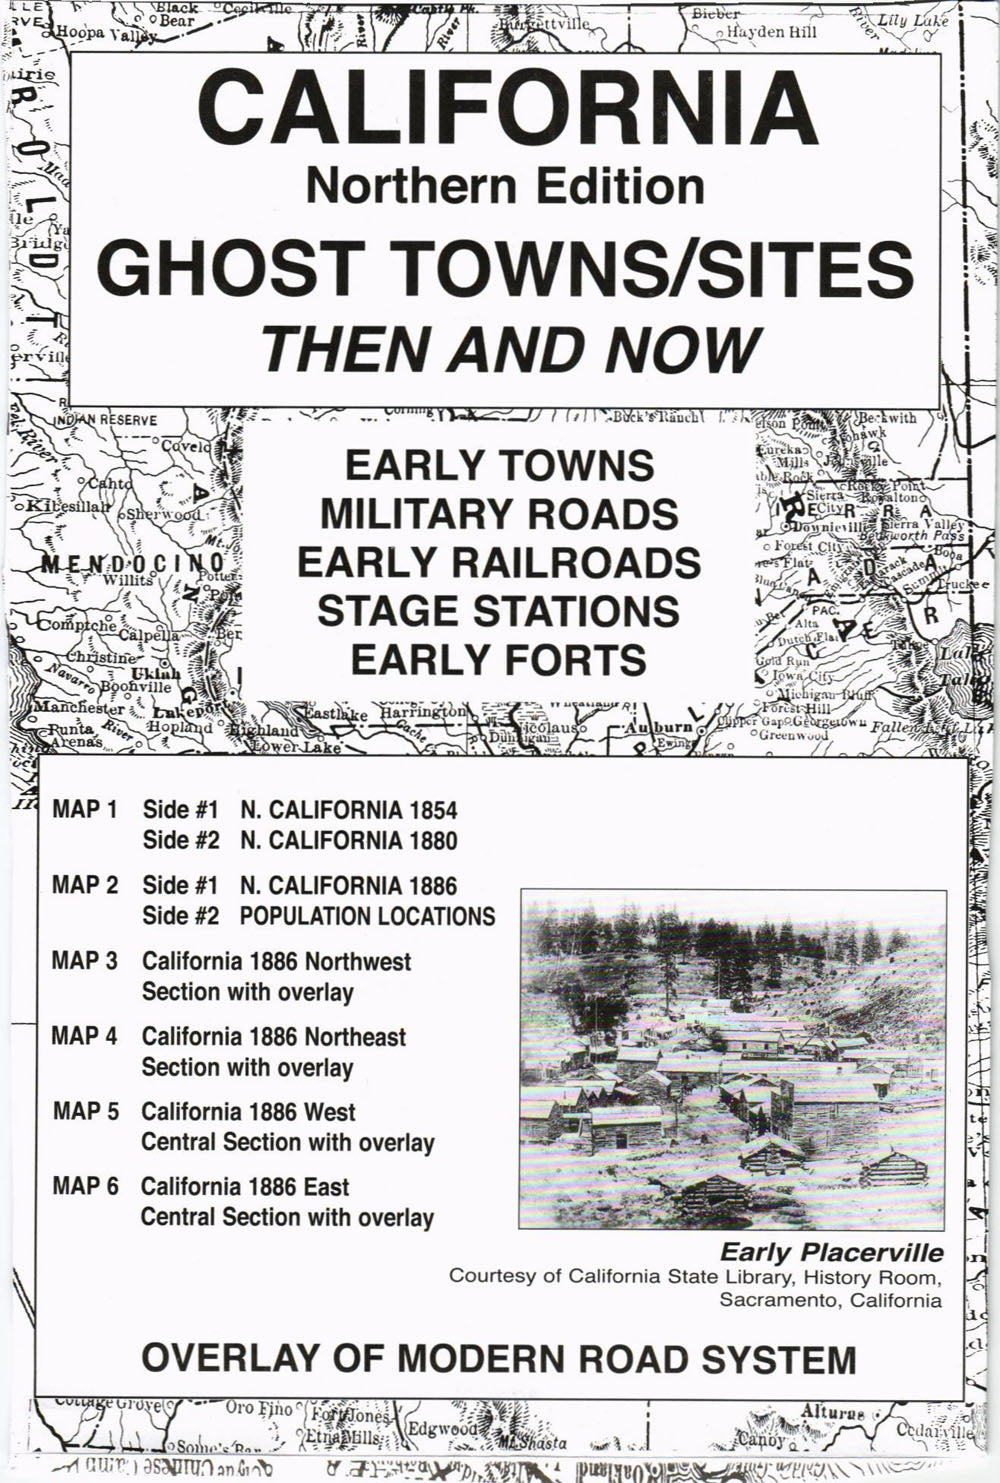 CALIFORNIA (NORTHERN) GHOST TOWNS/SITES: THEN AND NOW